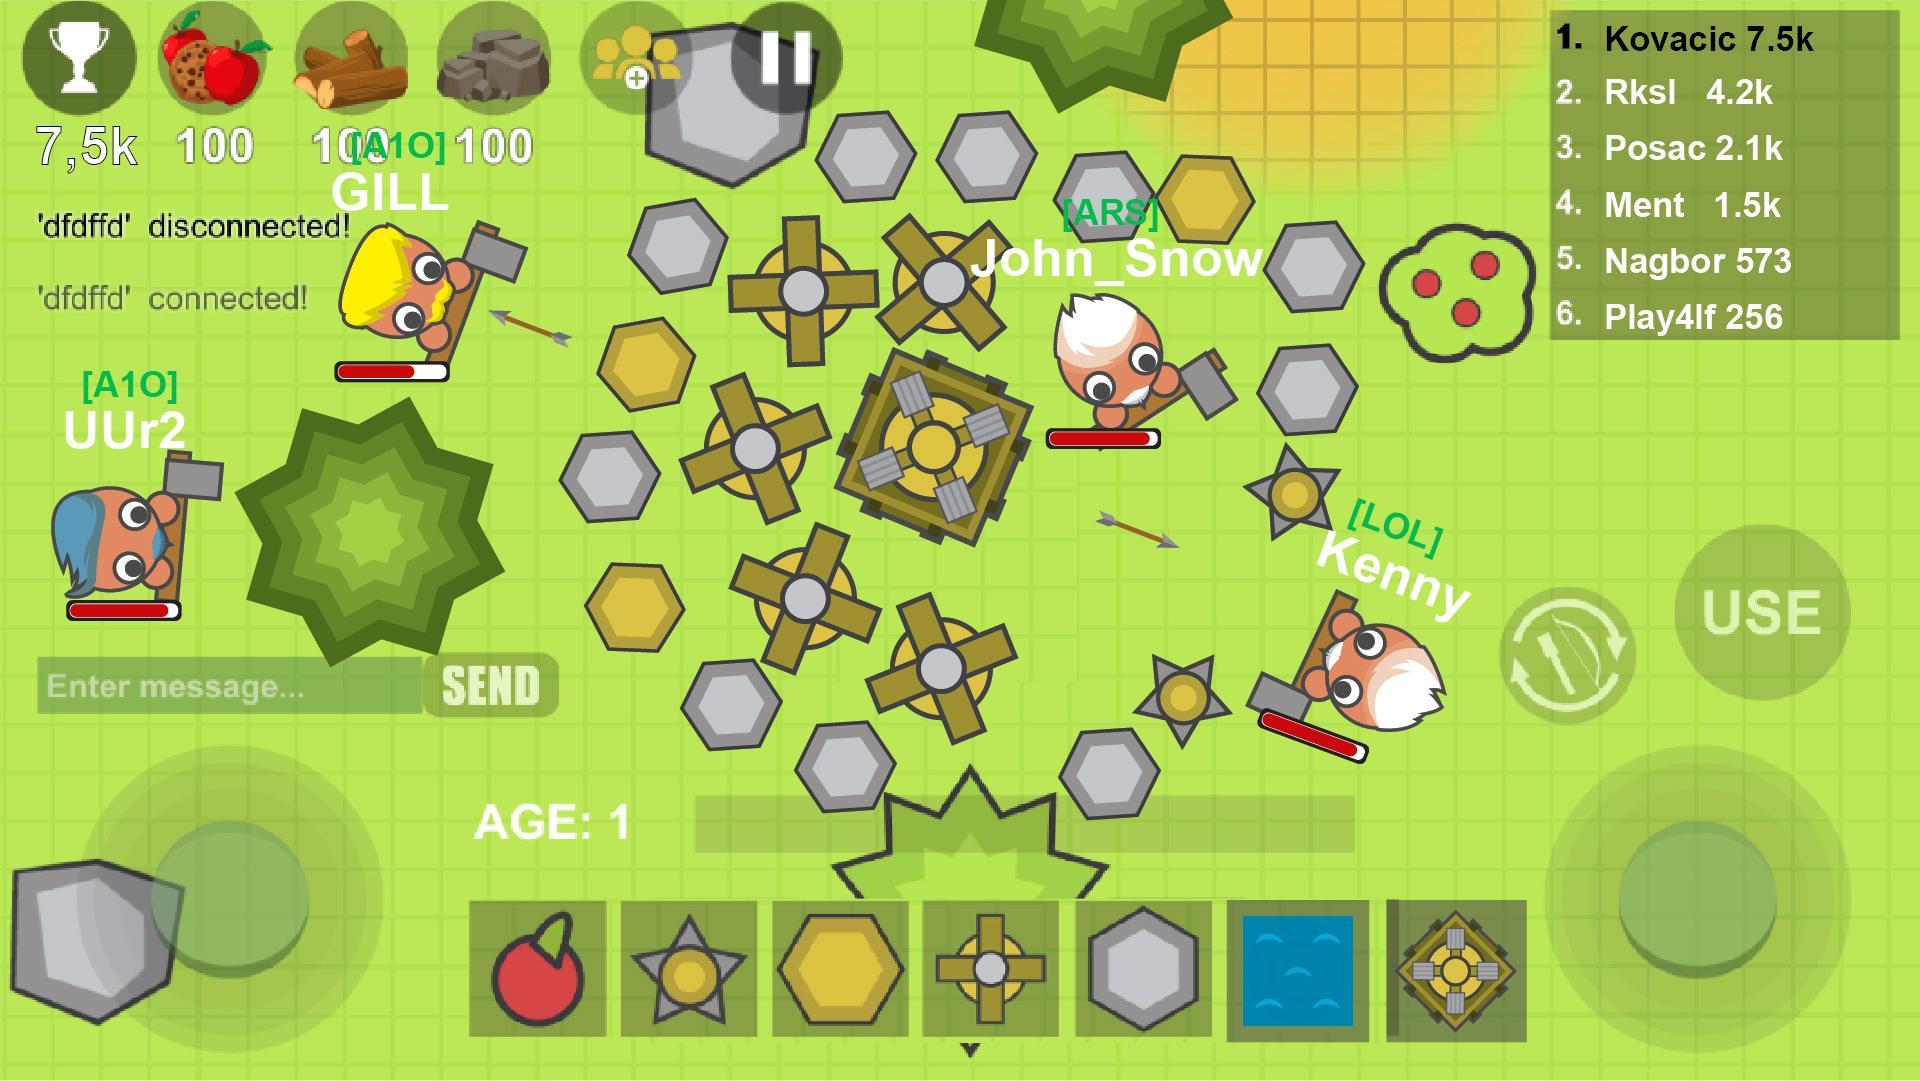 Images and Details of Moomoo IO Game